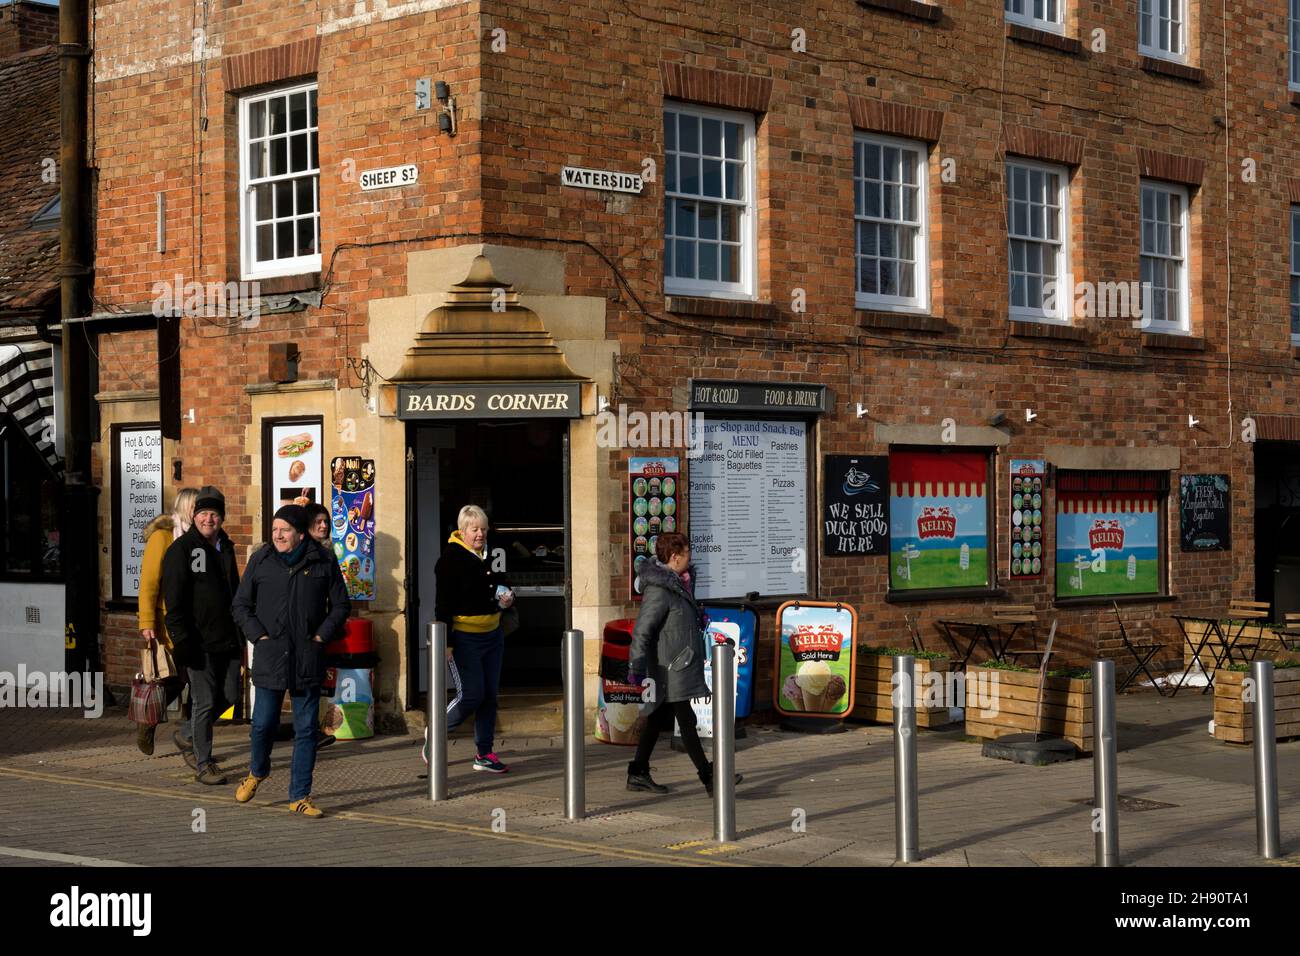 Magasin d'angle, Waterside/Sheep Street, Stratford-upon-Avon, Warwickshire, Angleterre,ROYAUME-UNI Banque D'Images